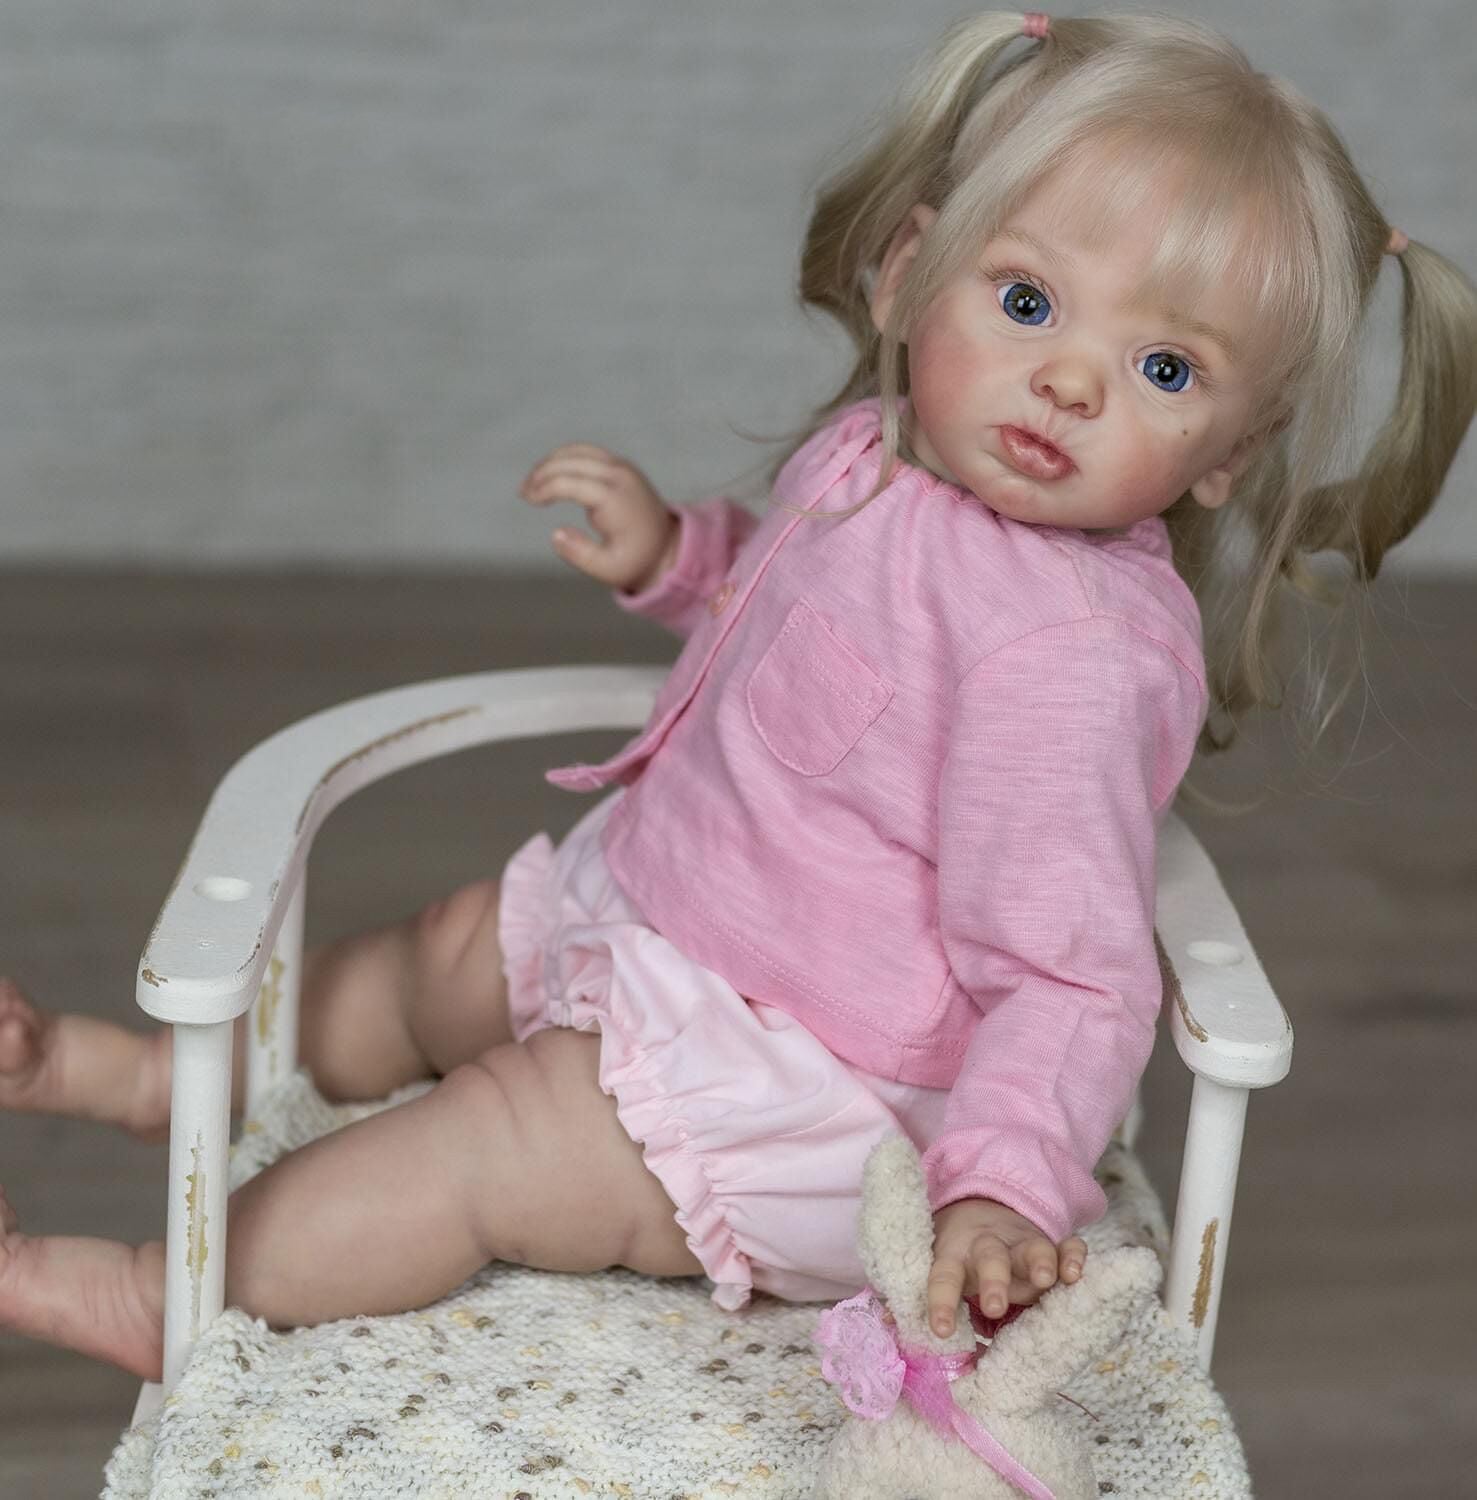 60cm | weighted cloth body | reborn baby dolls full body silicone lifelike baby dolls | reborn baby dolls | realistic baby dolls| newborn baby dolls | real life baby dolls | rebron baby dolls toddler | lifelike toddler dolls | therapy dolls for adults | anatomically correct baby girl doll | infant baby doll | gift for kids ages 3+ girl  | birthday gift | collection | girl | boys |  mother | daughter | granddaughter | sleeping |real look real baby dolls that look real looking | reborn toddler dolls | mnmj